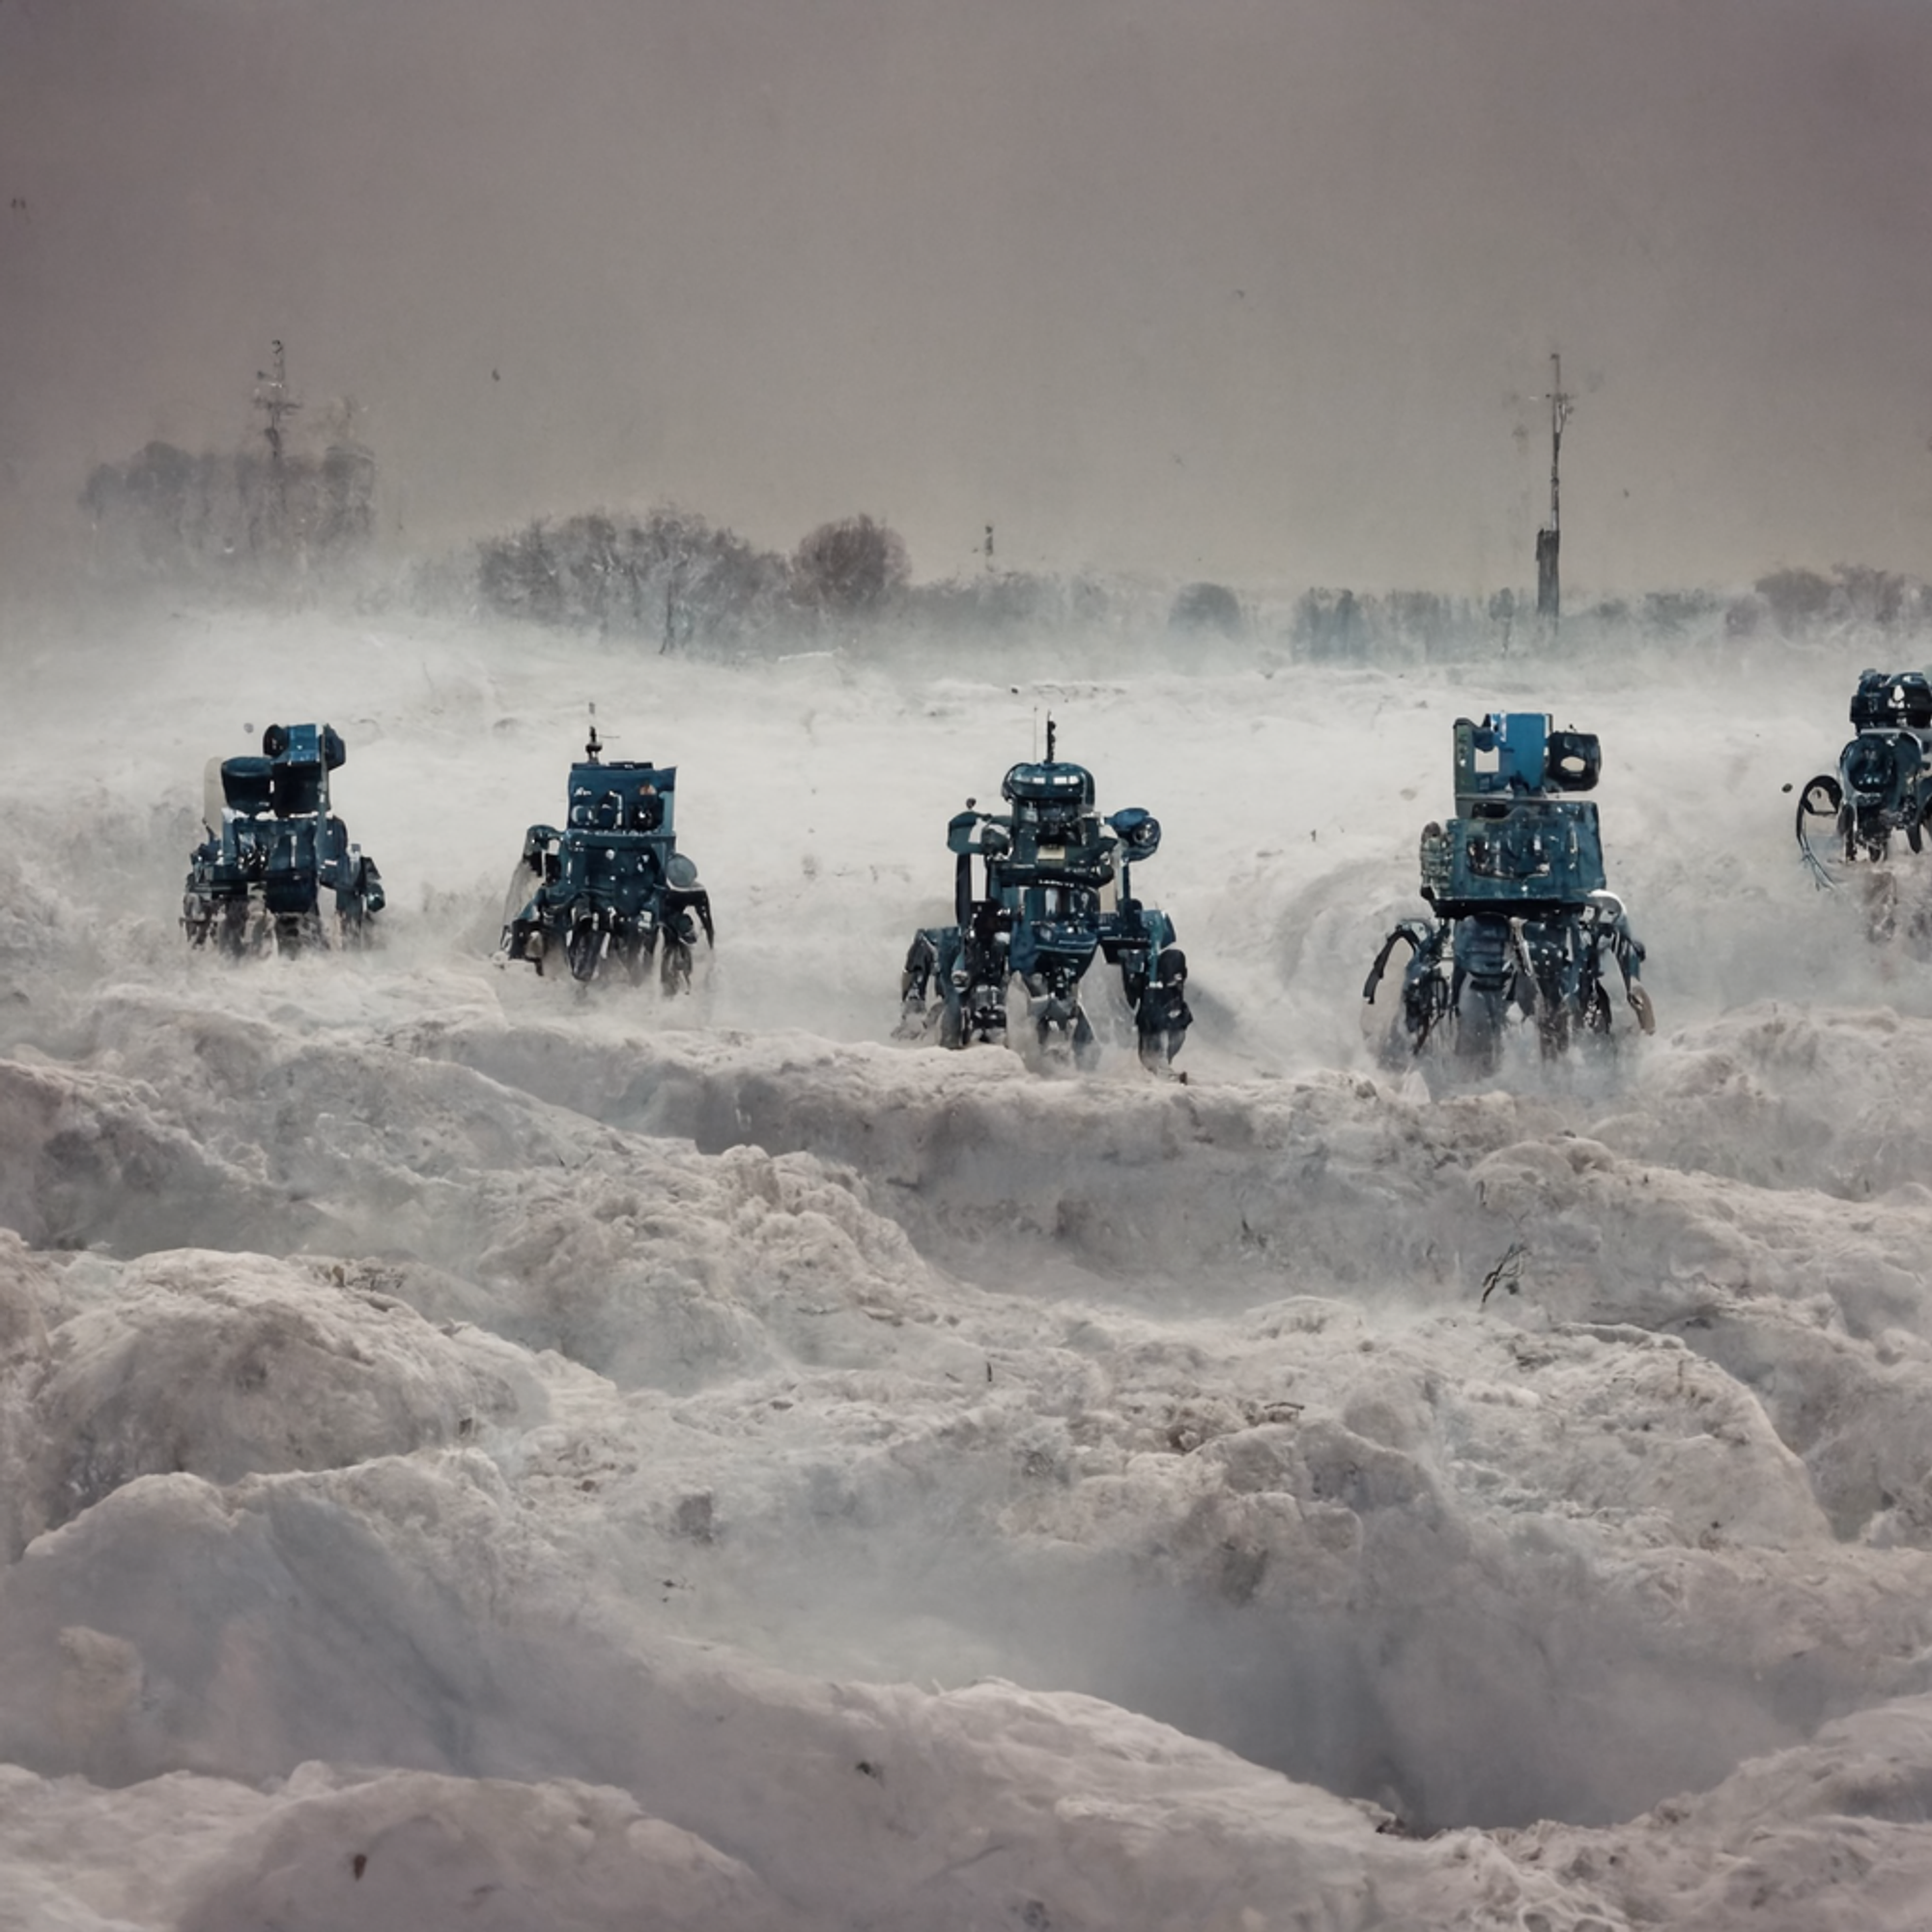 /imagine a cinematic picture of a group of robots migrating through a snowy plain during a storm, sideways, 100m away